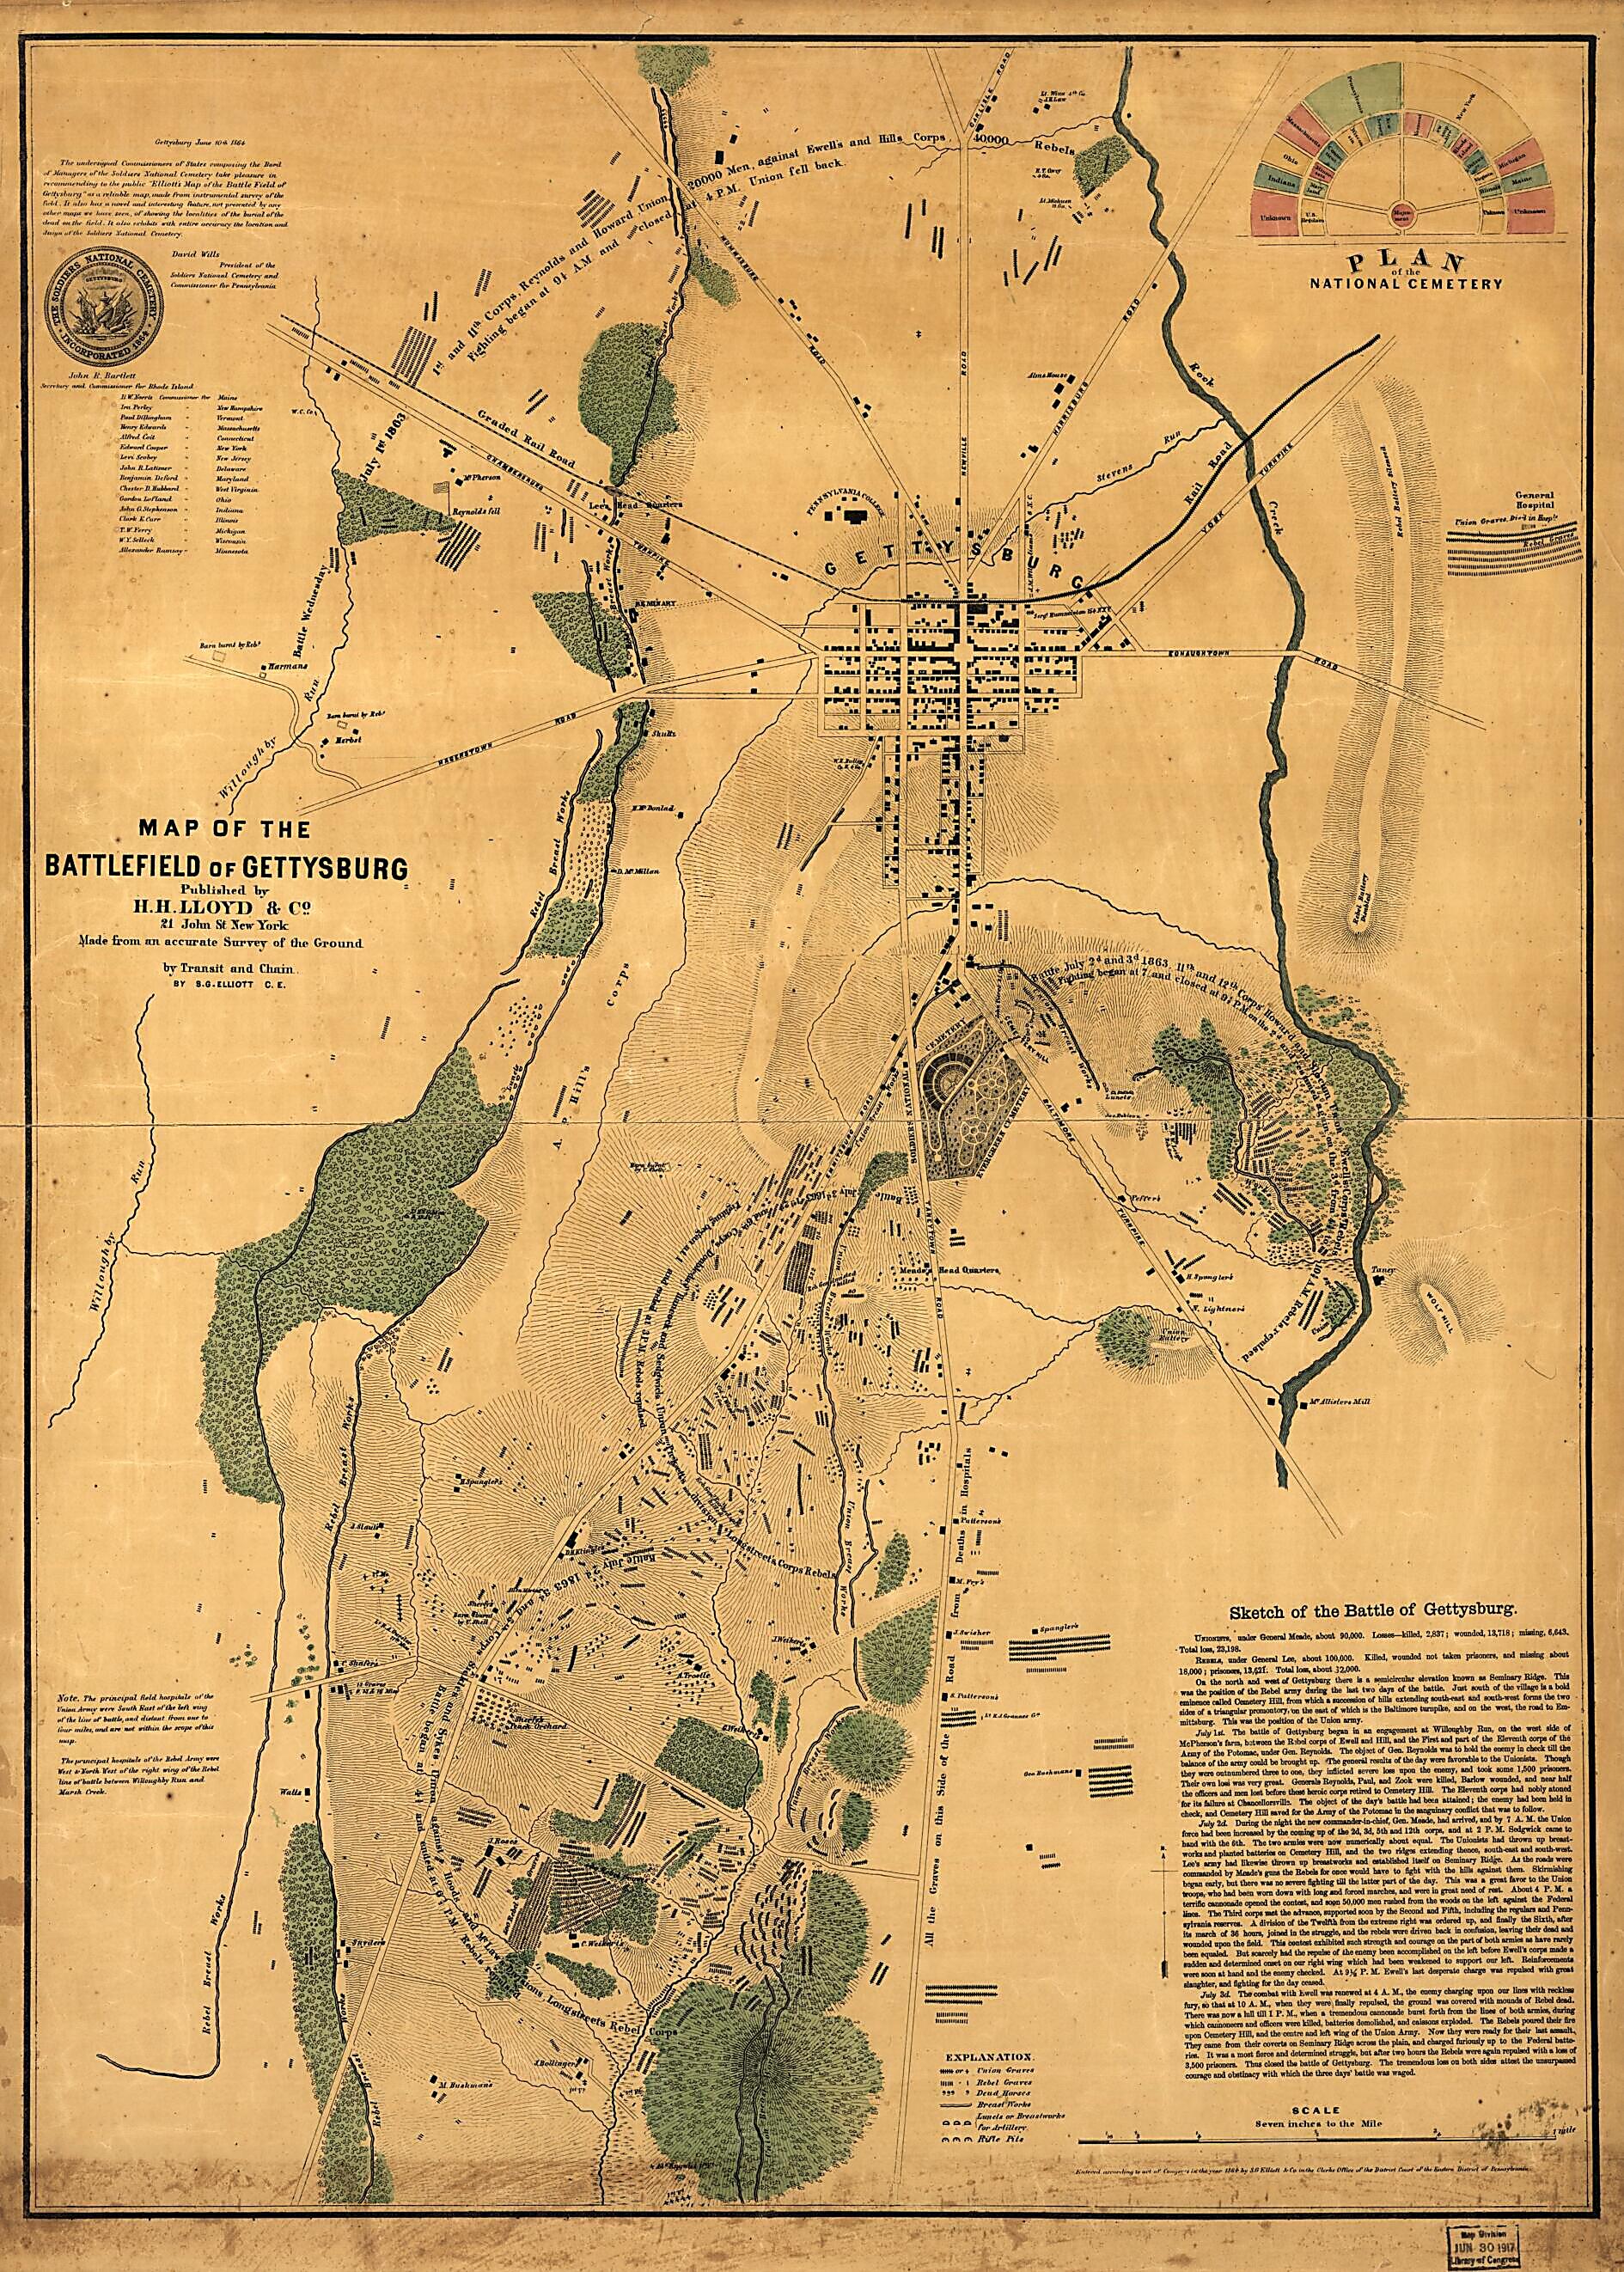 This old map of Map of the Battlefield of Gettysburg from 1864 was created by S. G. Elliott in 1864